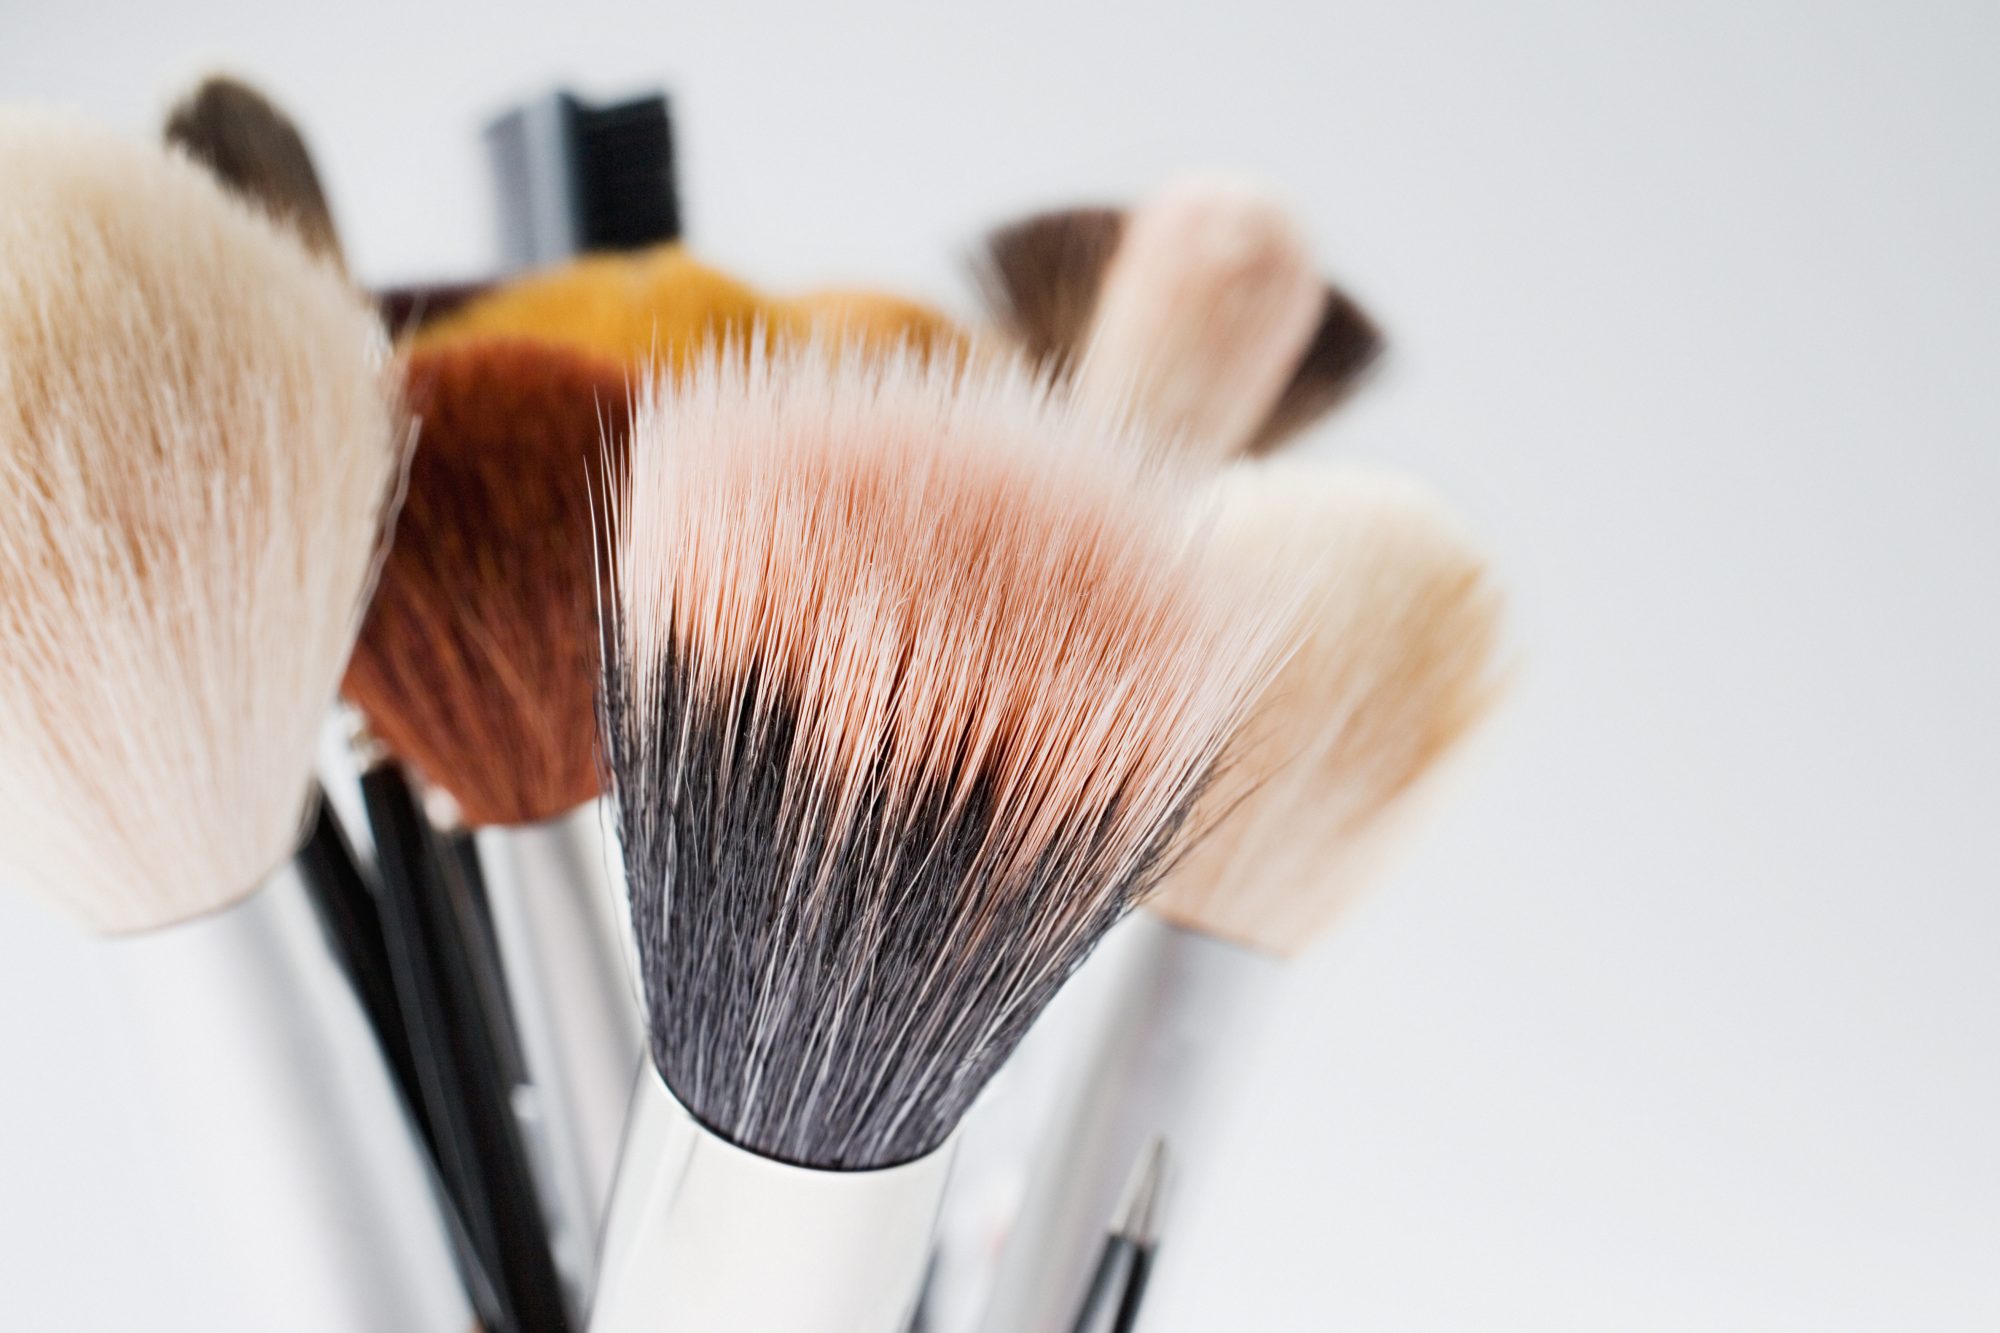 Your Makeup Brushes And Sponges Clean